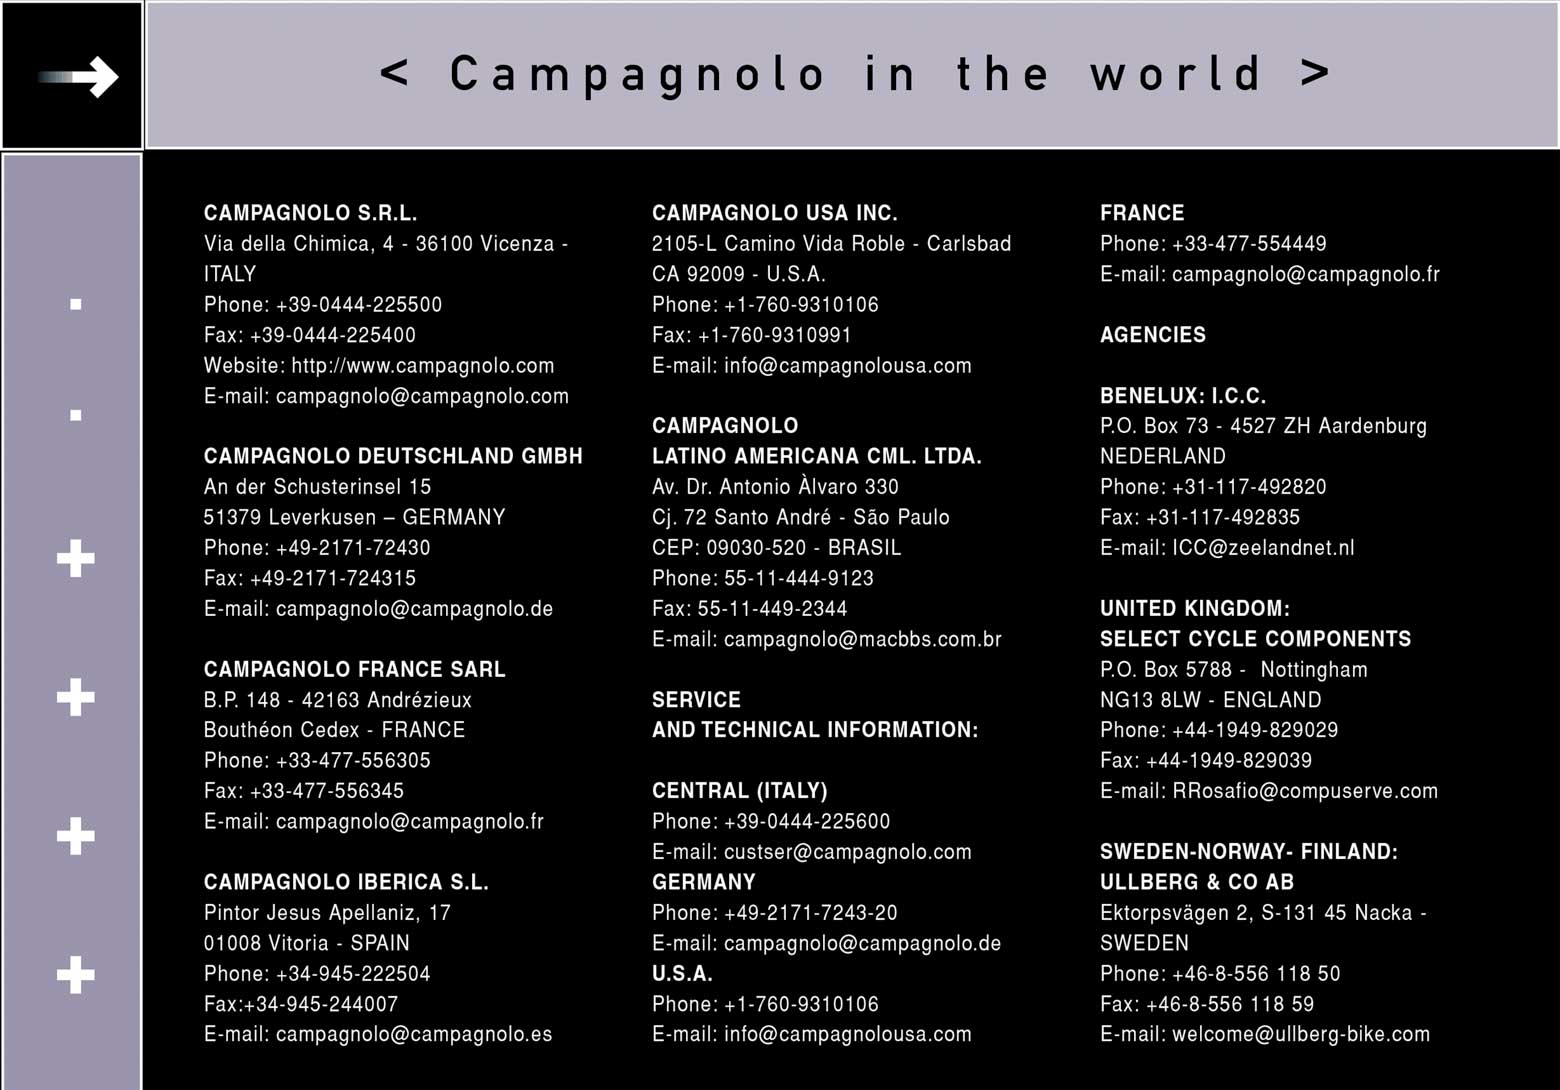 Campagnolo - 2000 Spare Parts and Tools Catalogue rear cover main image